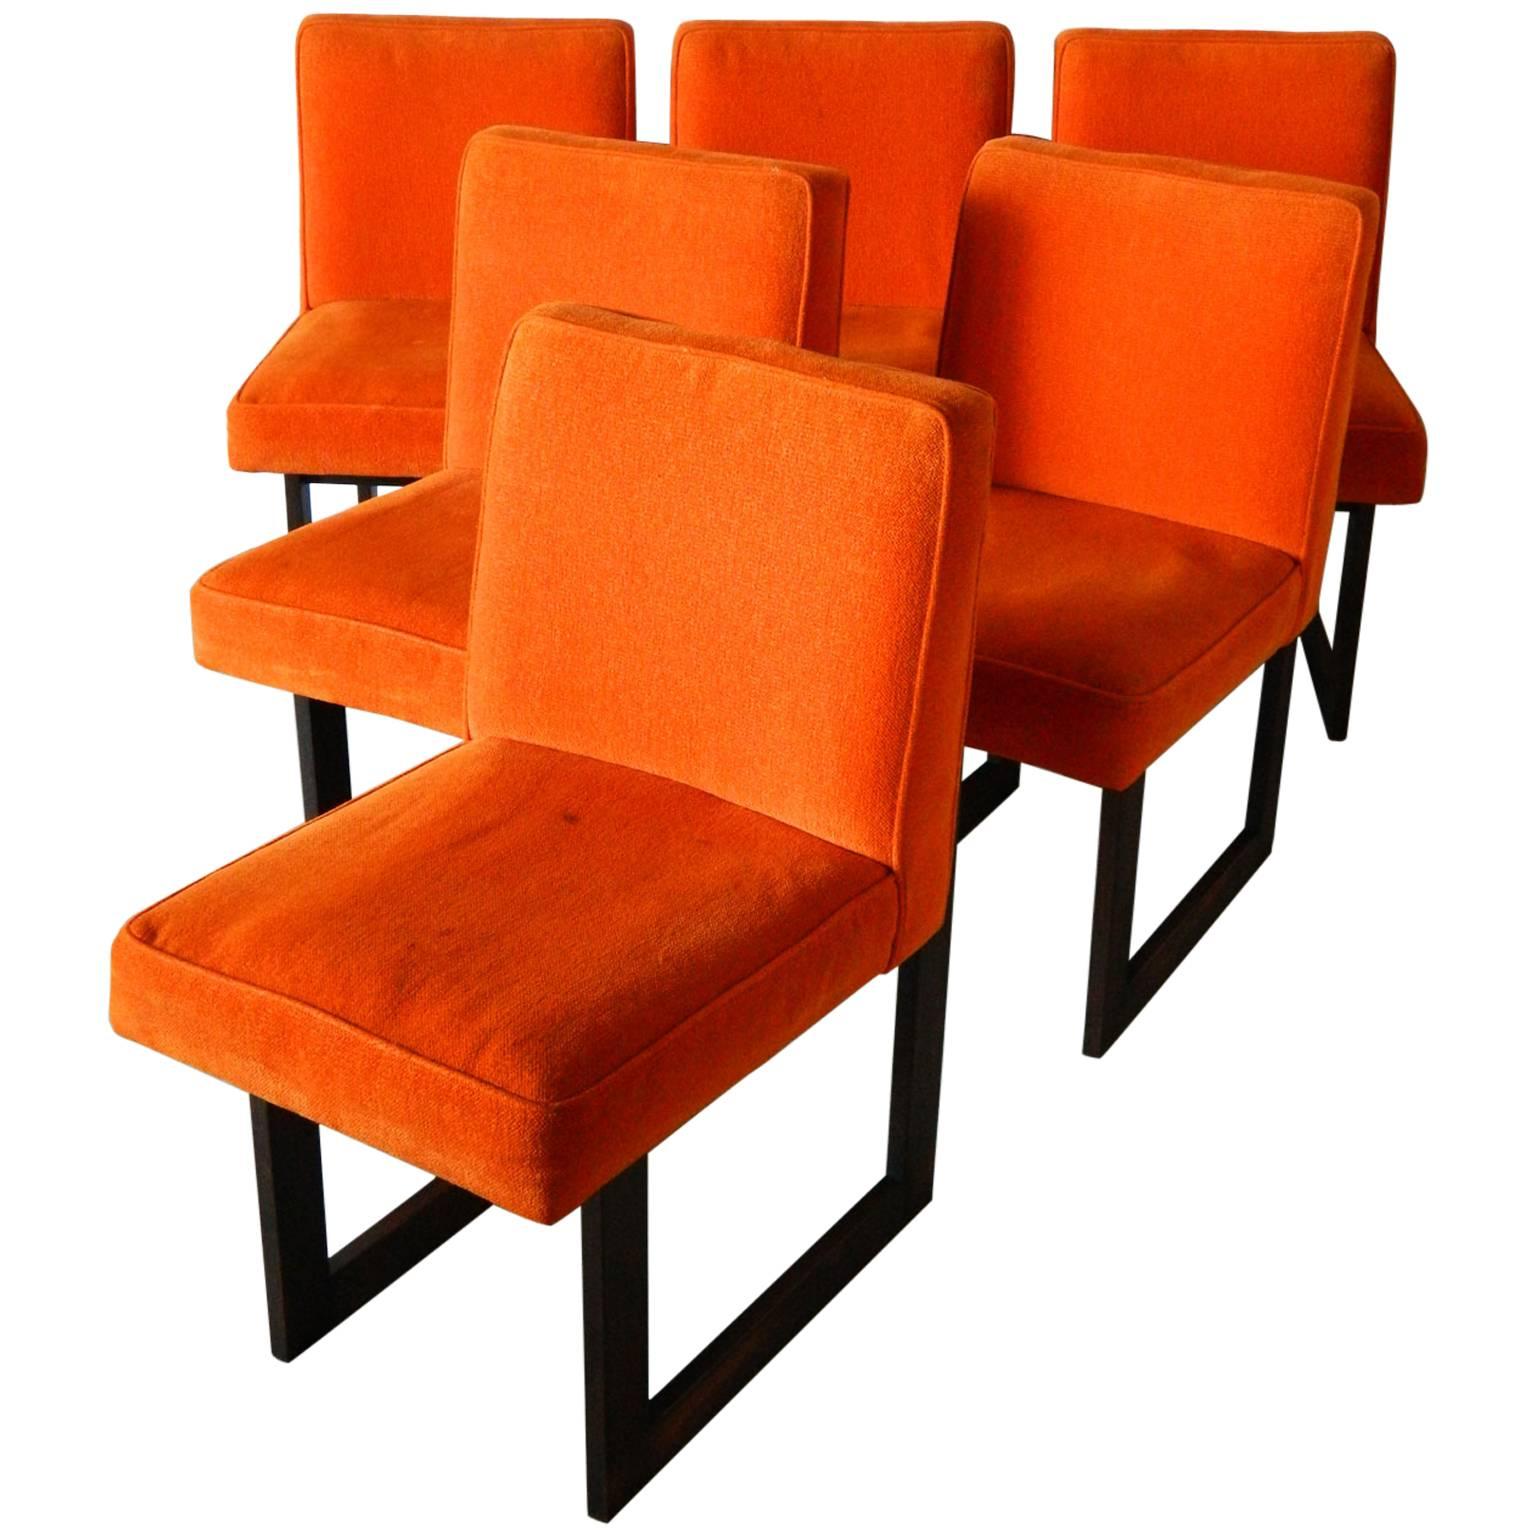 Vladimir Kagan Cubist Dining Chairs For Sale